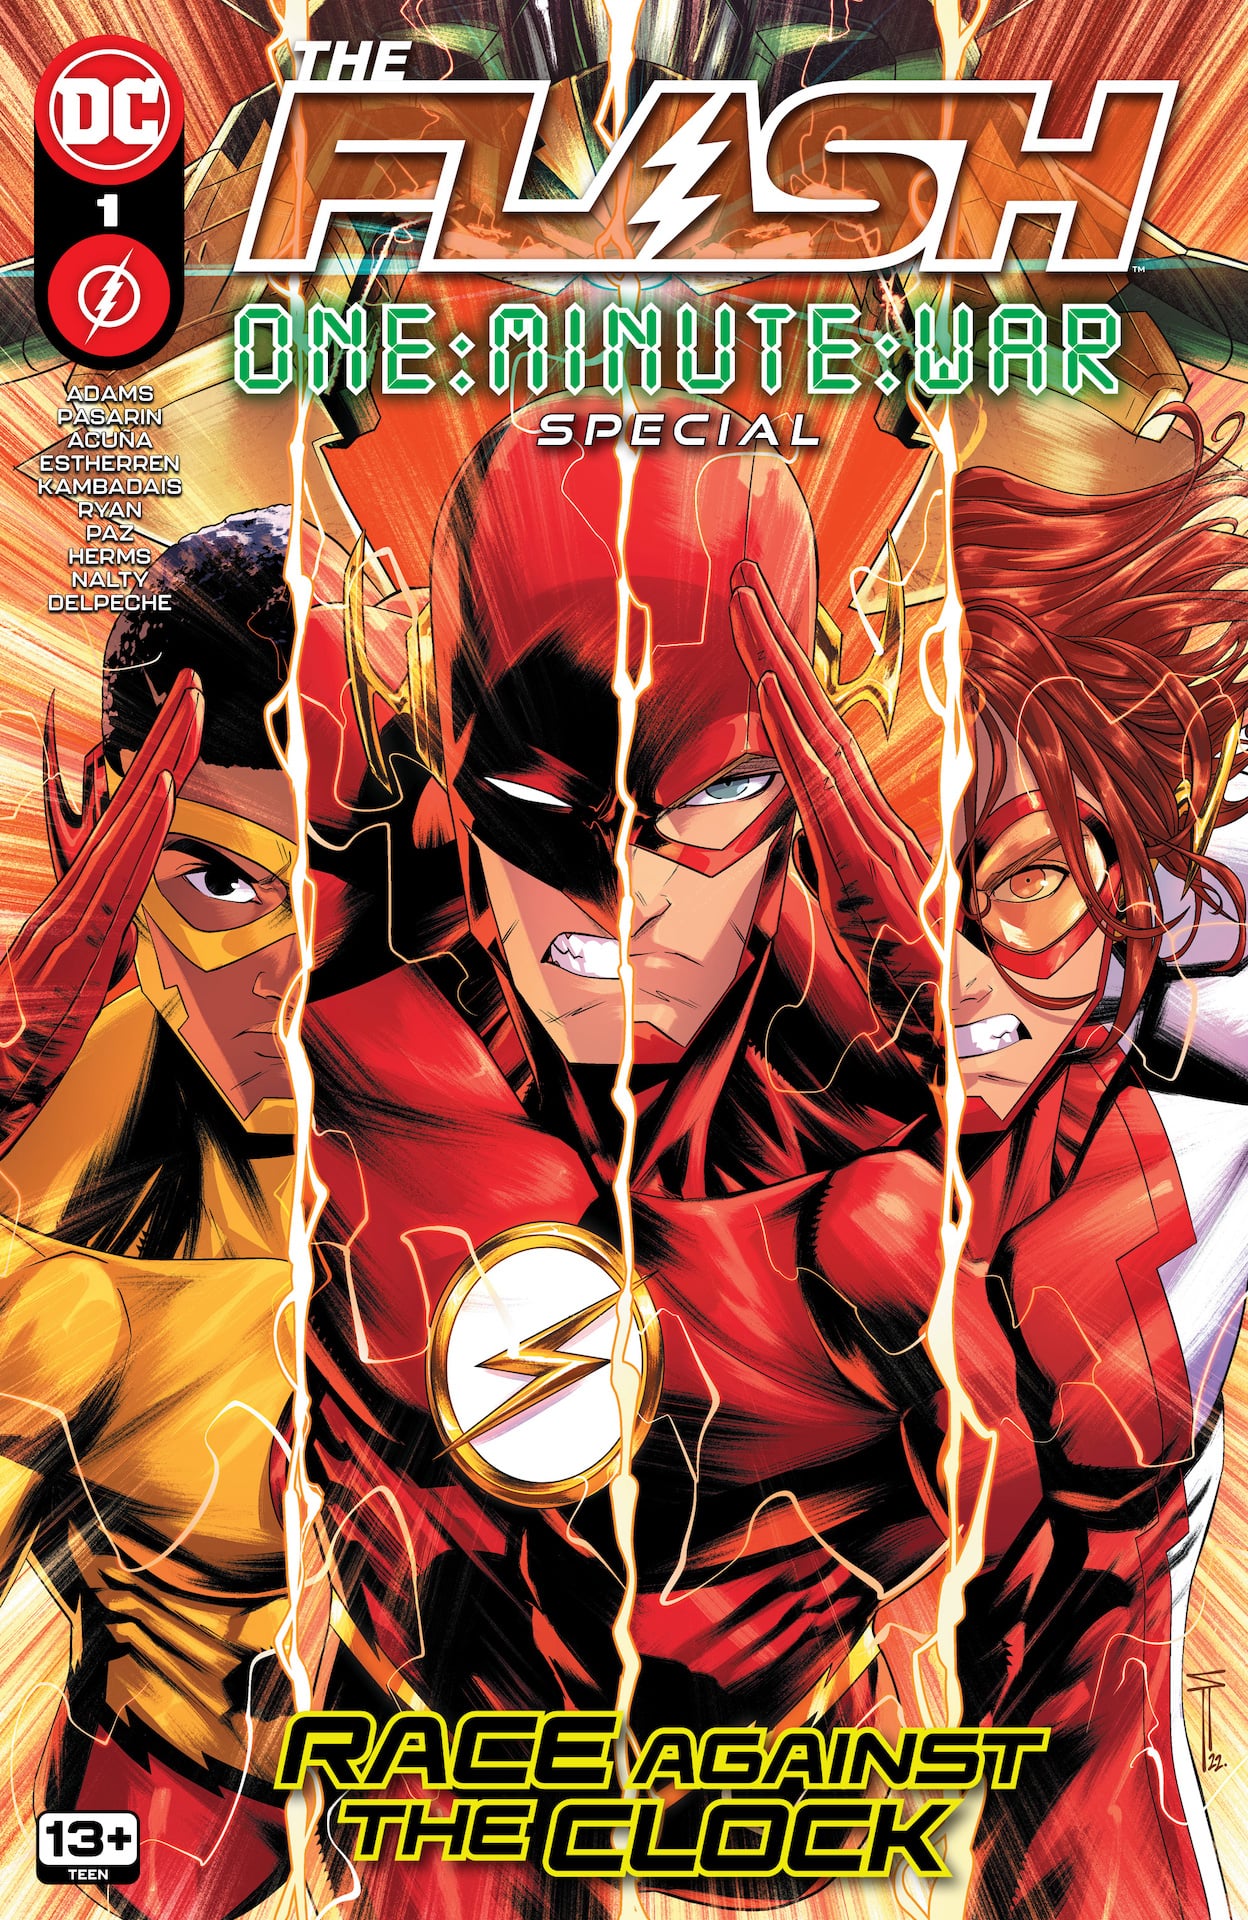 DC Preview: The Flash: One-Minute War Special #1